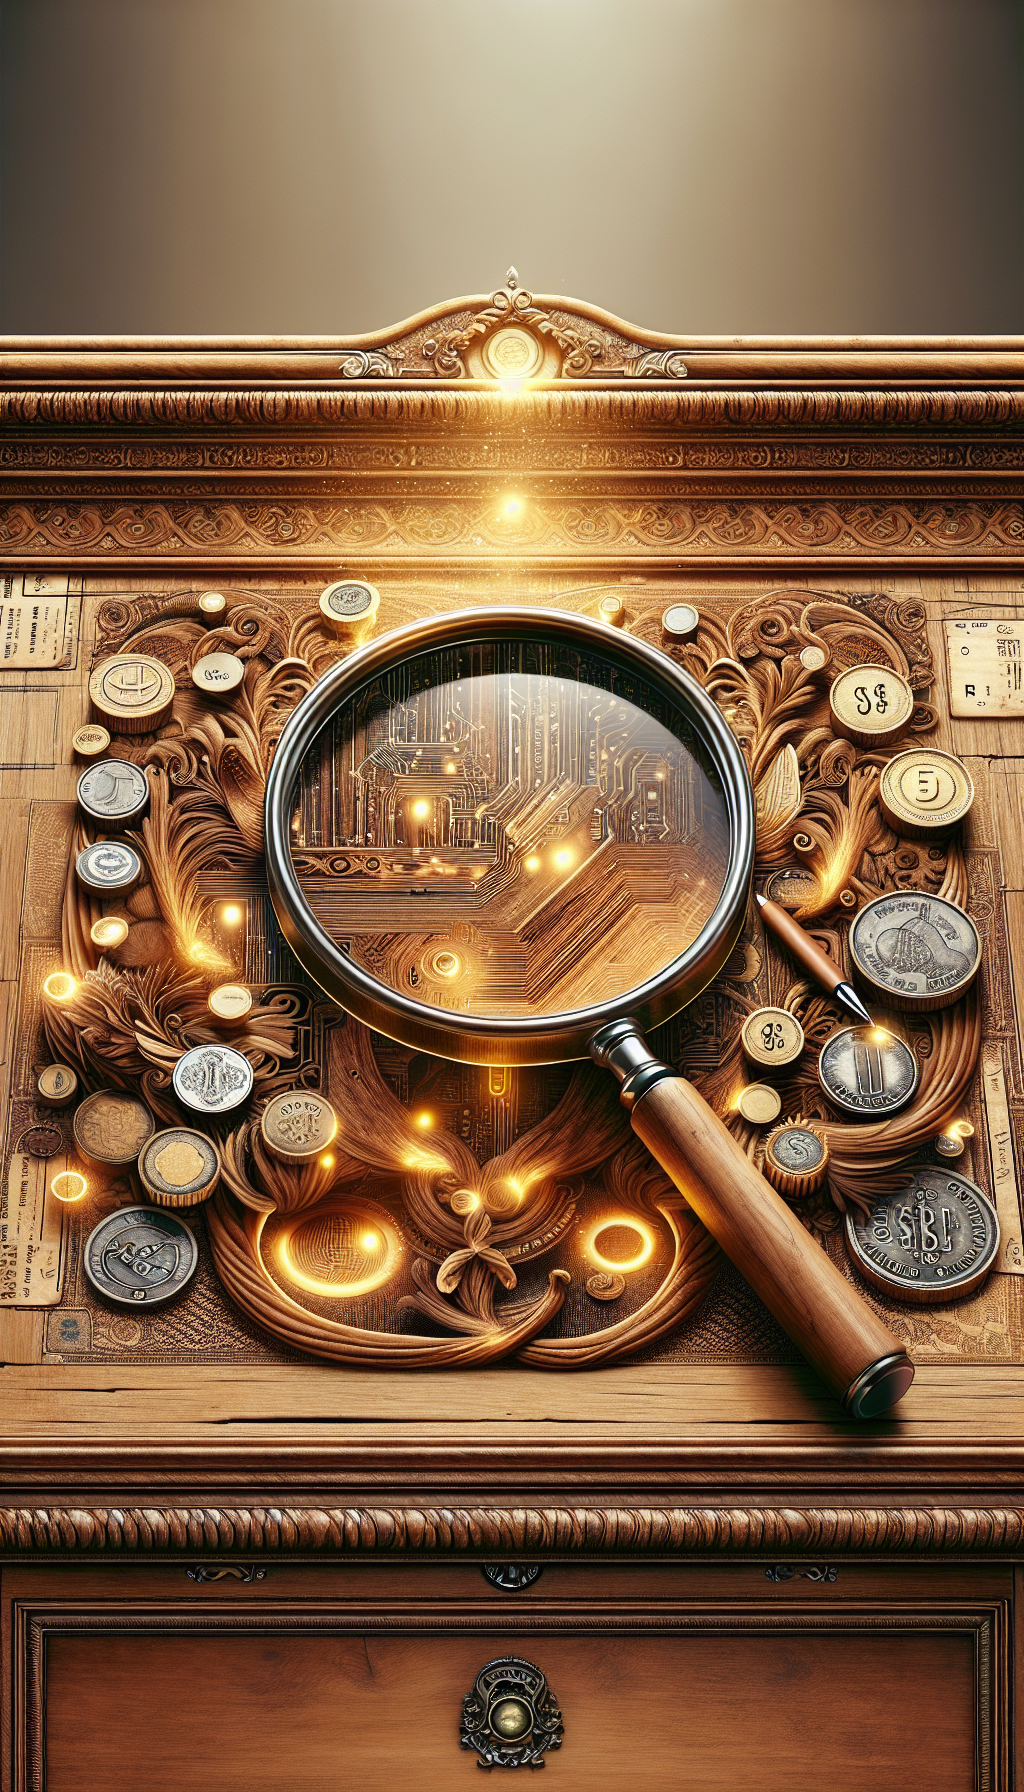 In the illustration, a magnifying glass hovers over an elegant, antique desk, revealing luminous signatures and marks from various famed manufacturers etched in the wood grain. The desk features intricate designs with coins and price tags artistically blended into the embellishments, representing its value. The styles vary from photorealistic wood textures to playful, abstract currency motifs.